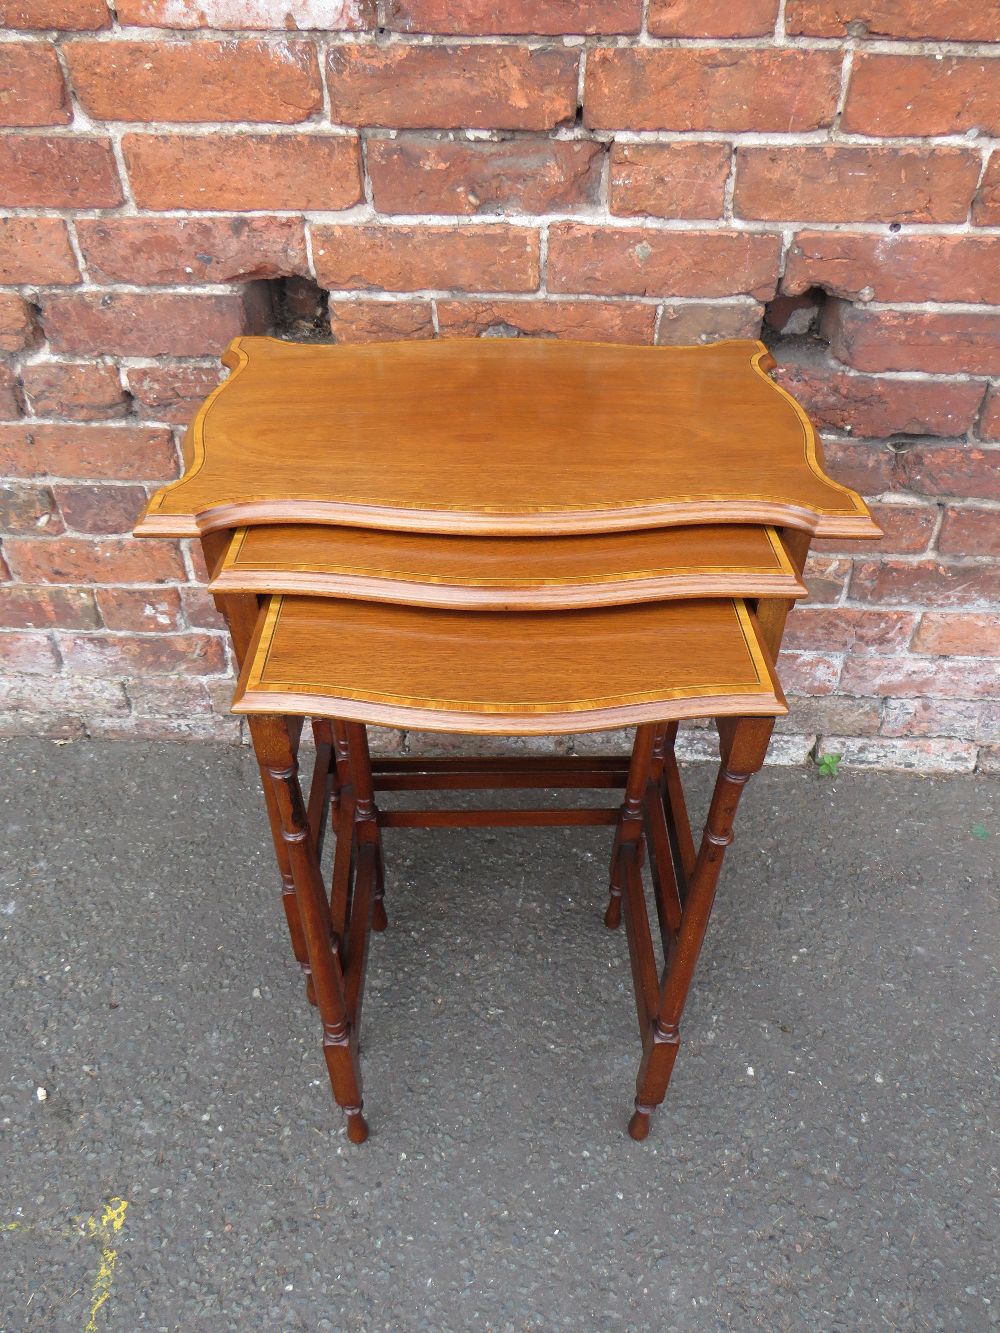 AN EDWARDIAN MAHOGANY NEST OF TABLES, the shaped tops with satinwood banding, H 71 cm, W 54 cm